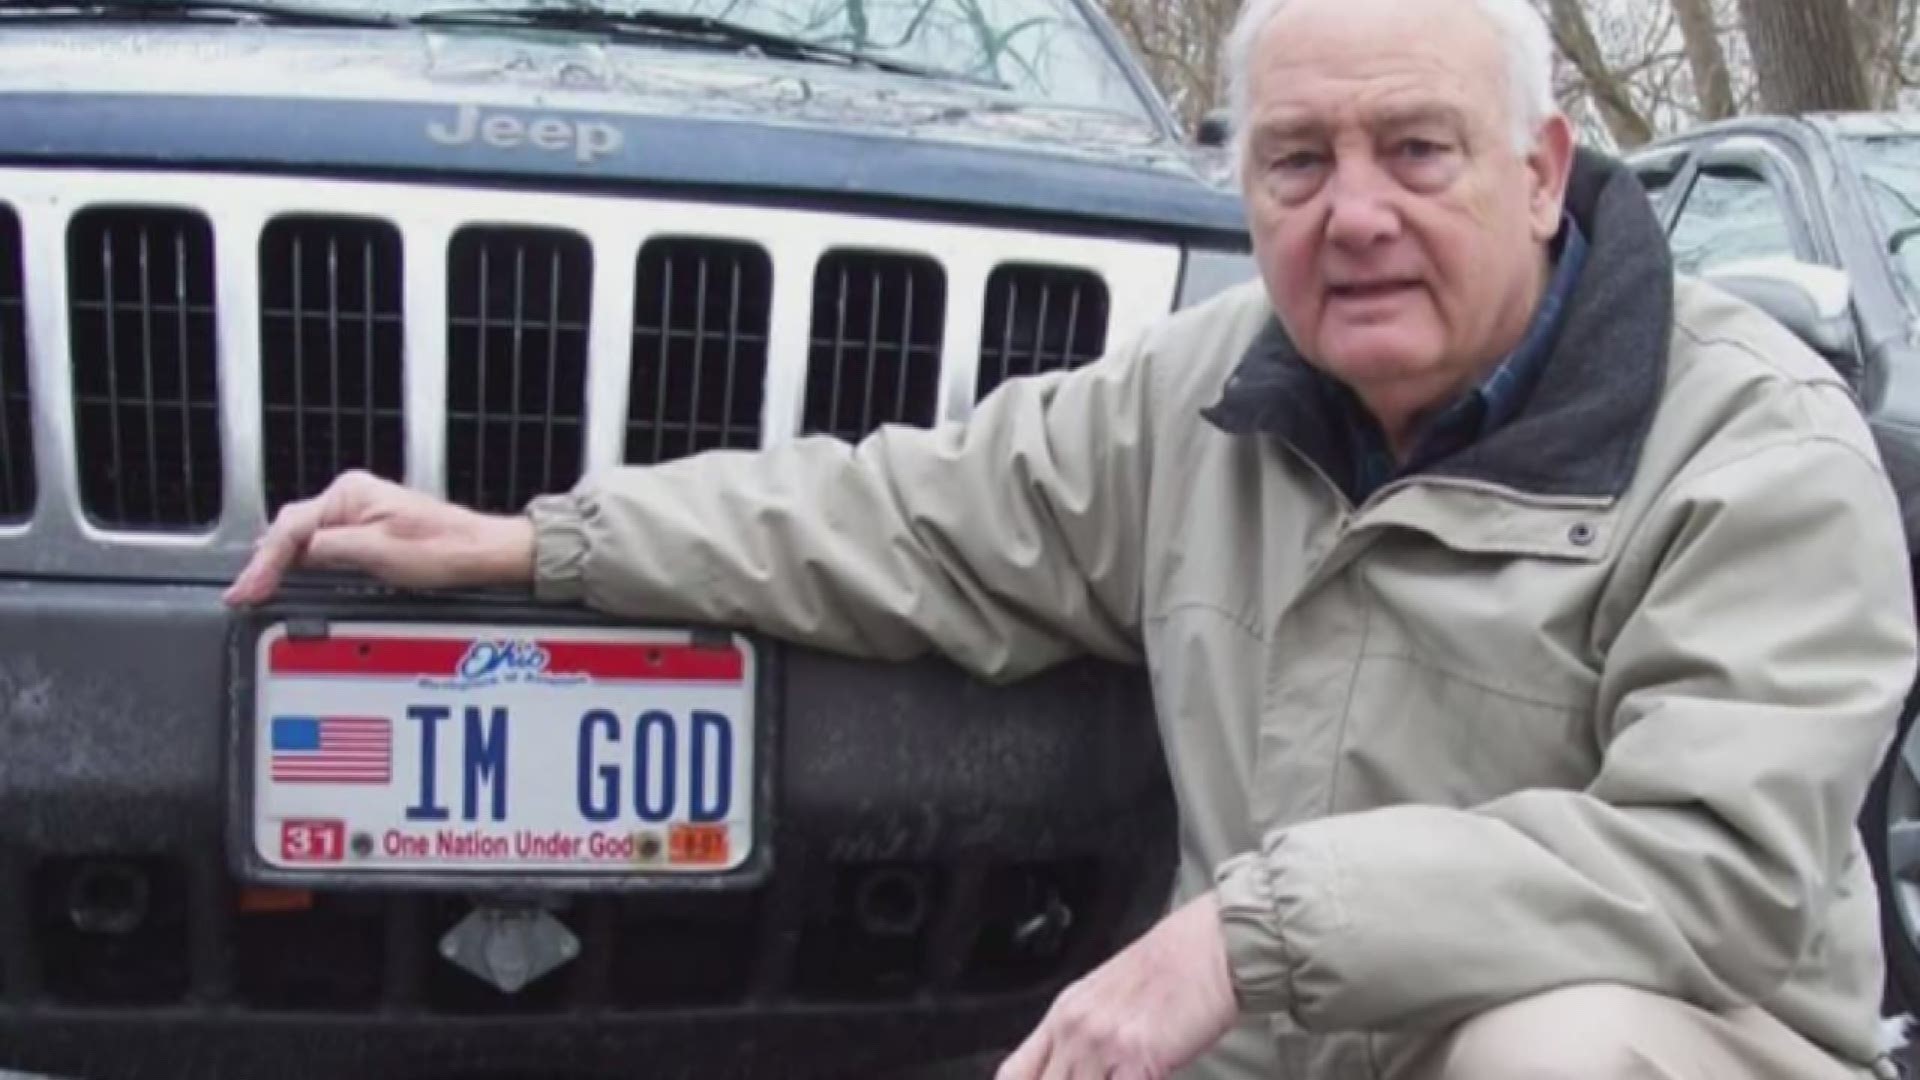 IM GOD': Kentucky atheist's vanity plate approved by judge